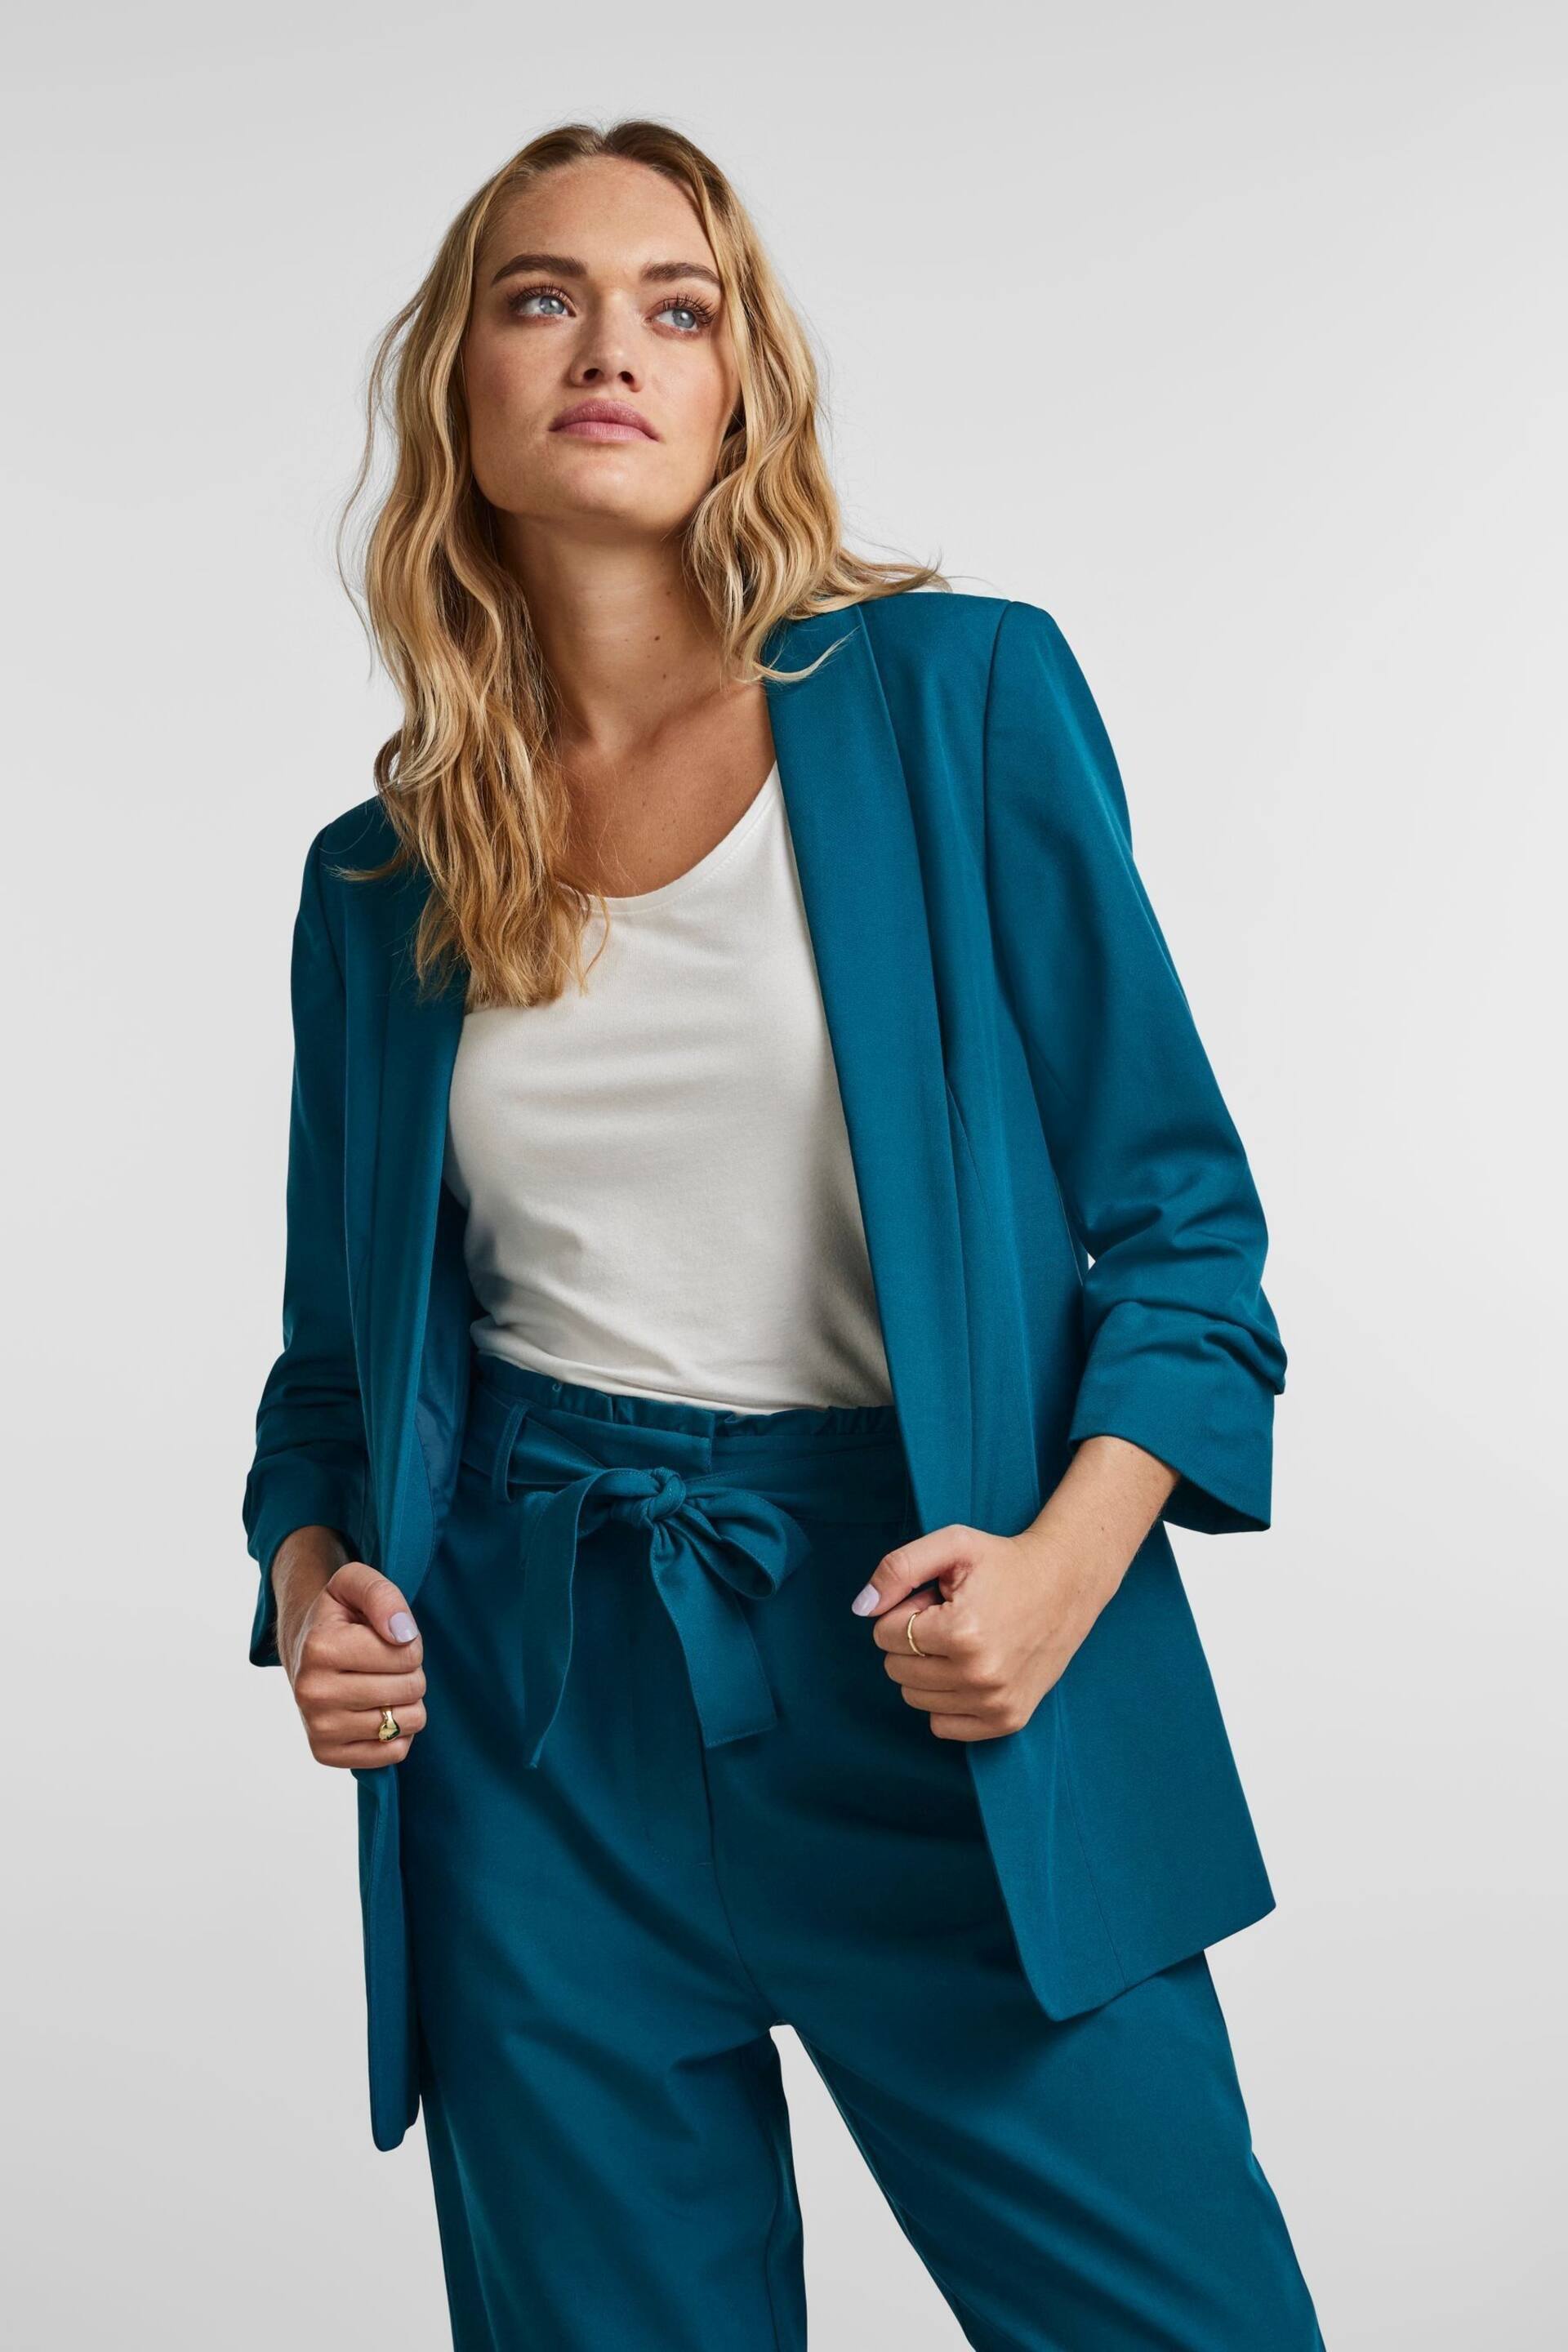 PIECES Blue Ruched Sleeve Blazer - Image 1 of 6